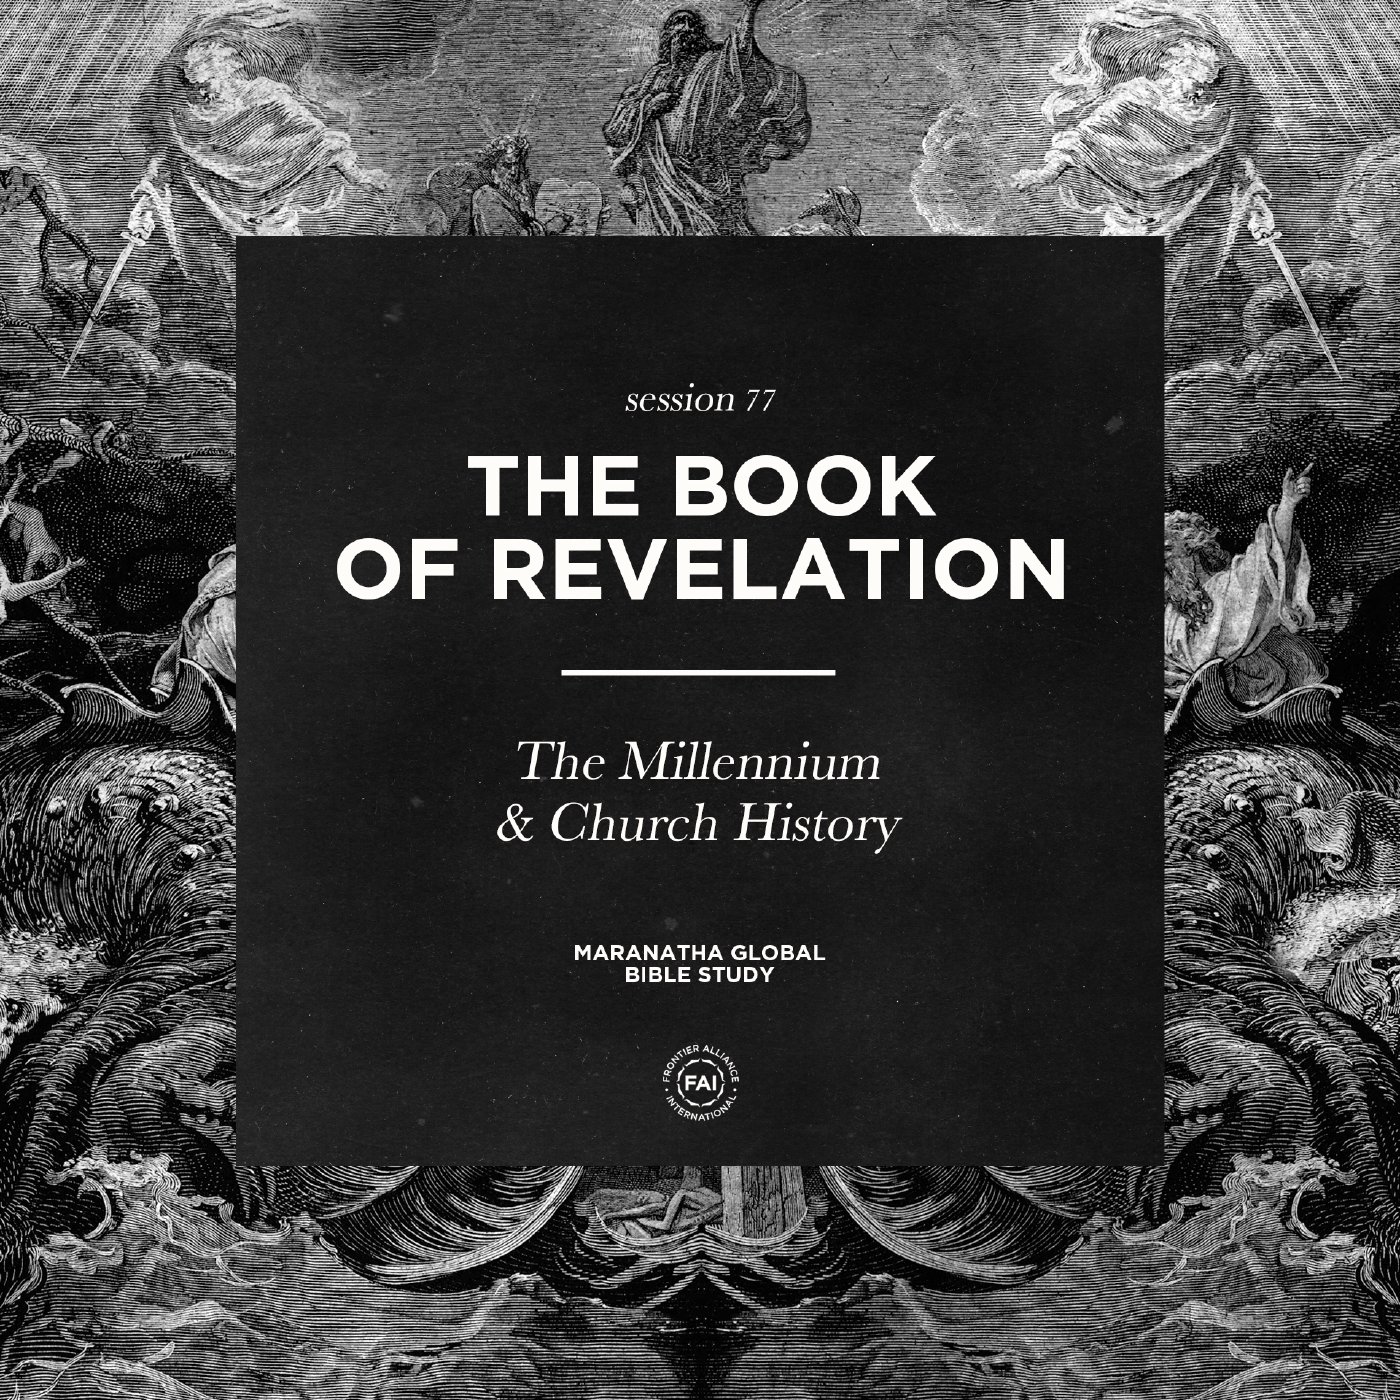 The Millennium & Church History // THE BOOK OF REVELATION with JOEL RICHARDSON